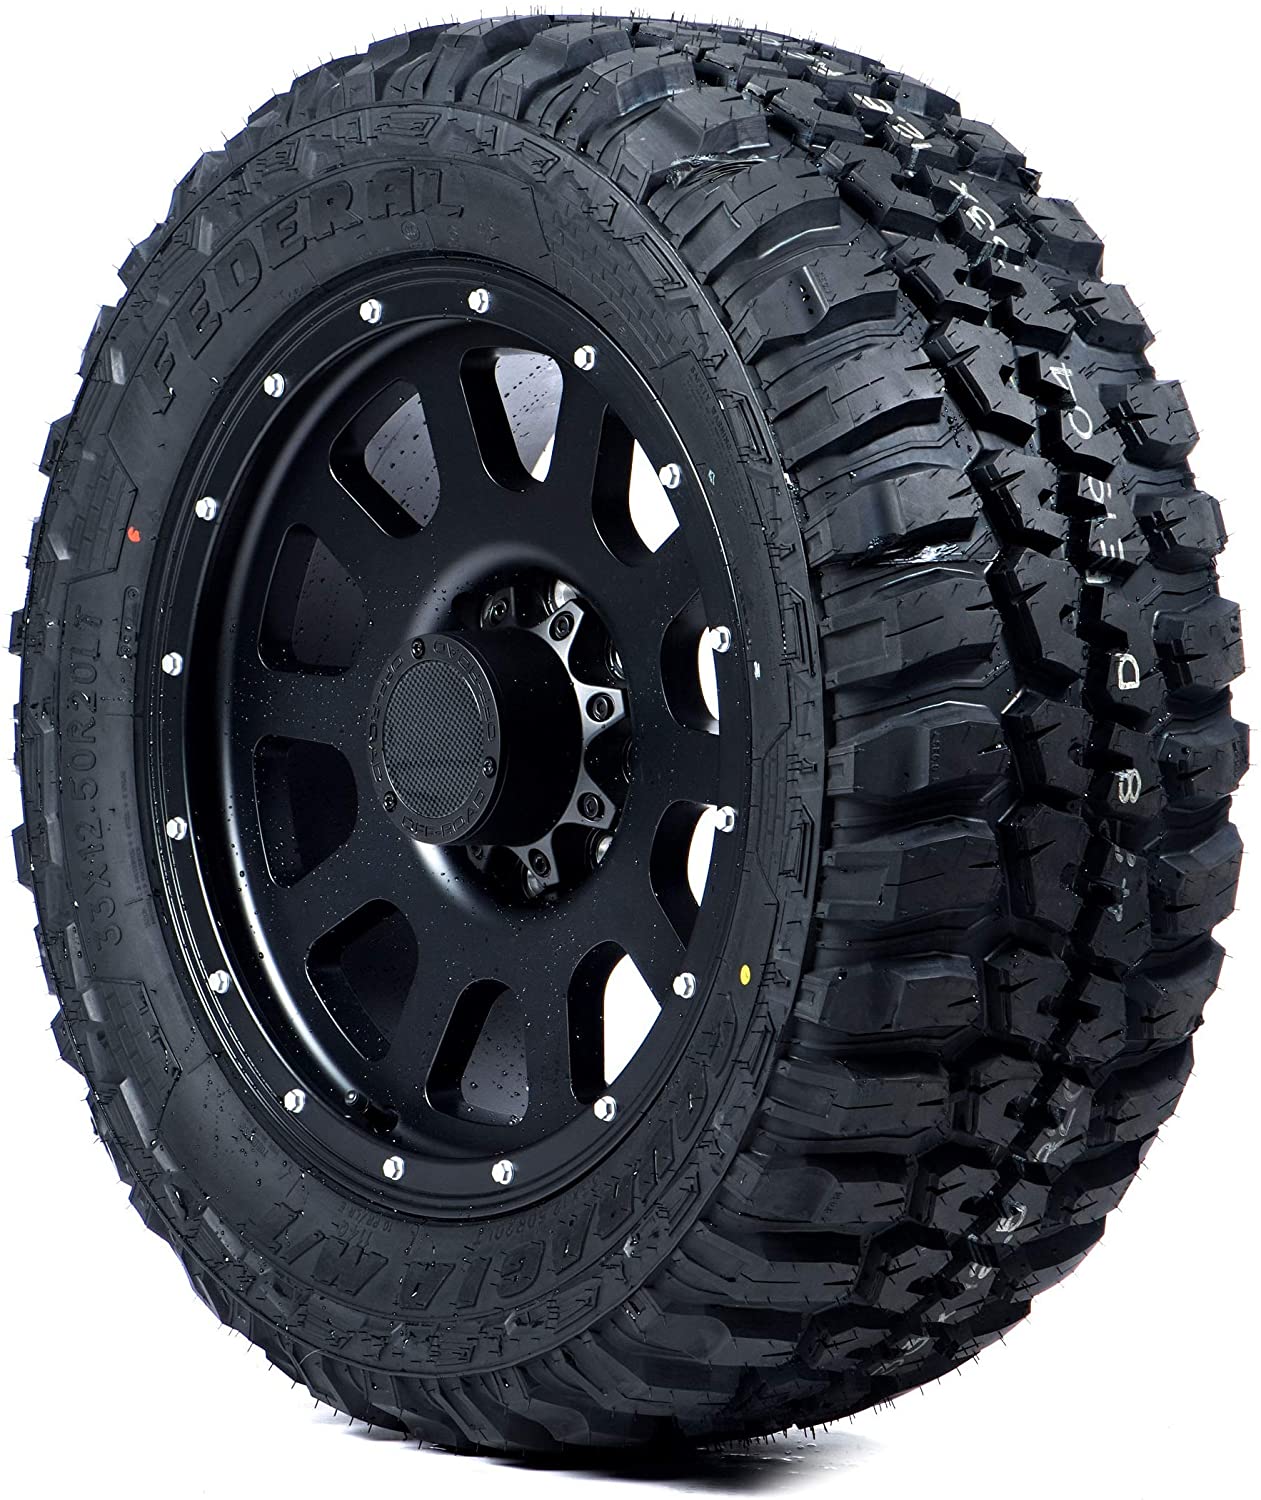 Best All Terrain Tires For Toyota Tacoma